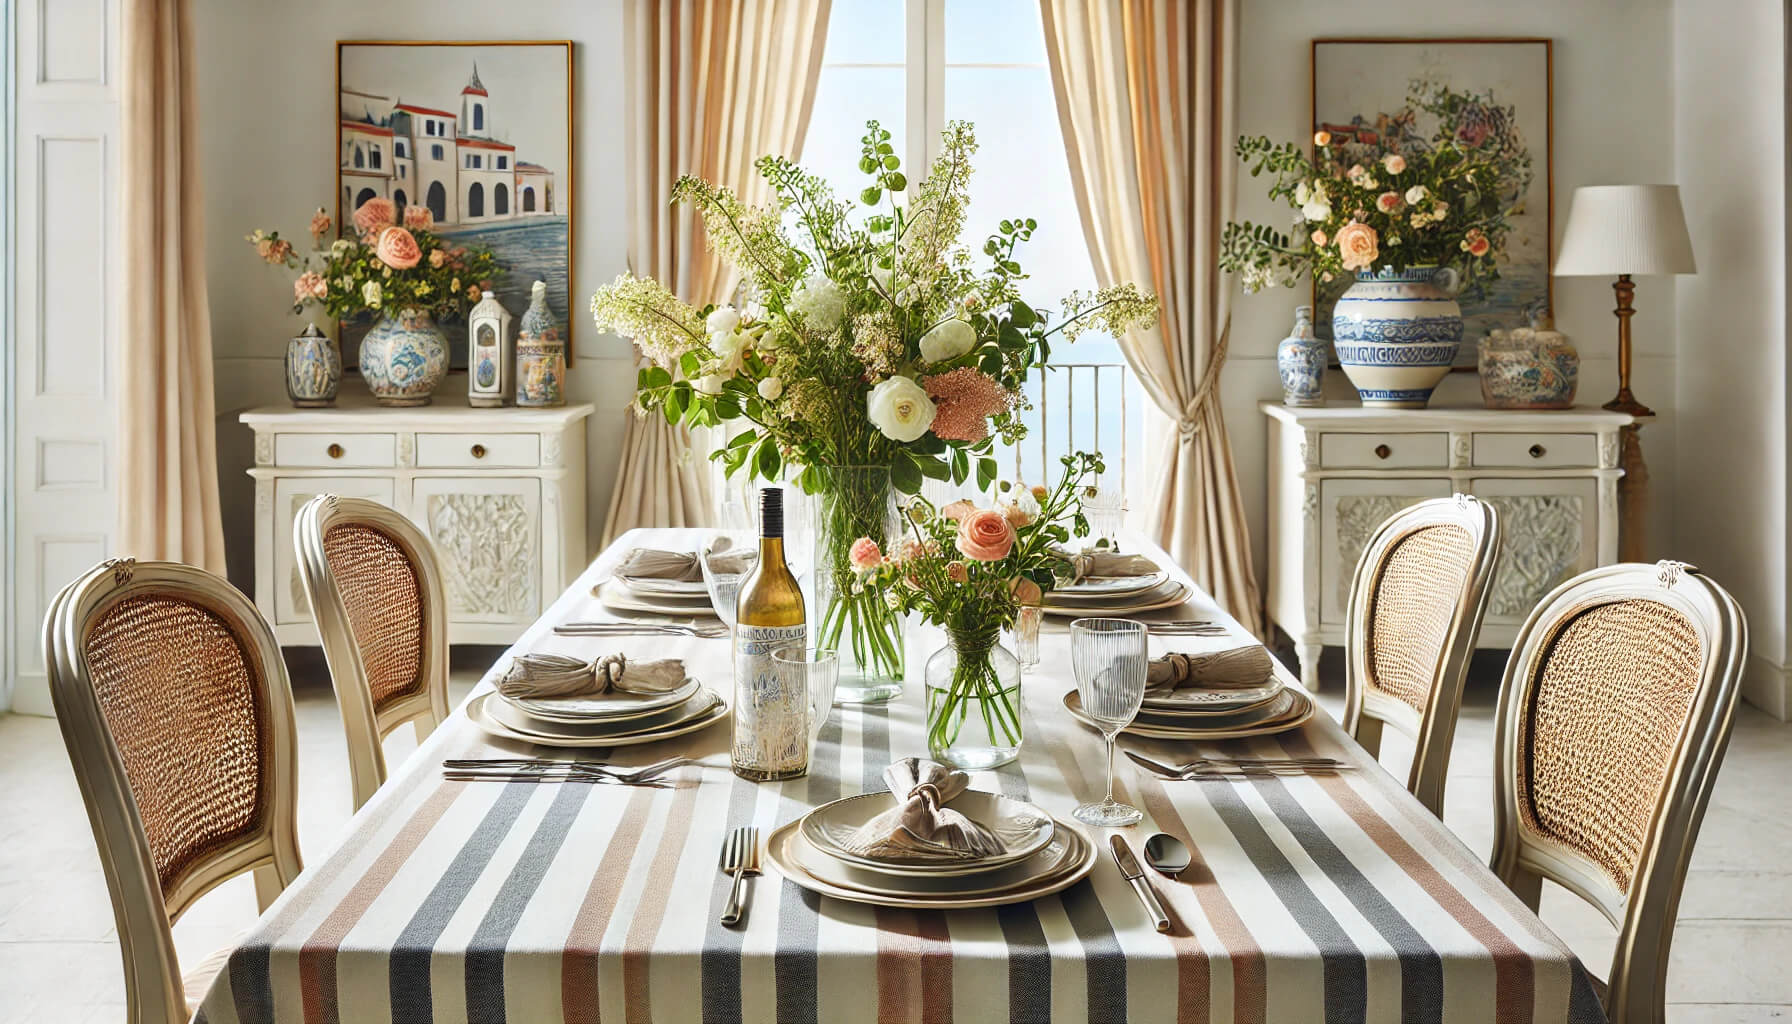 How To Keep Linen Tablecloths From Wrinkling